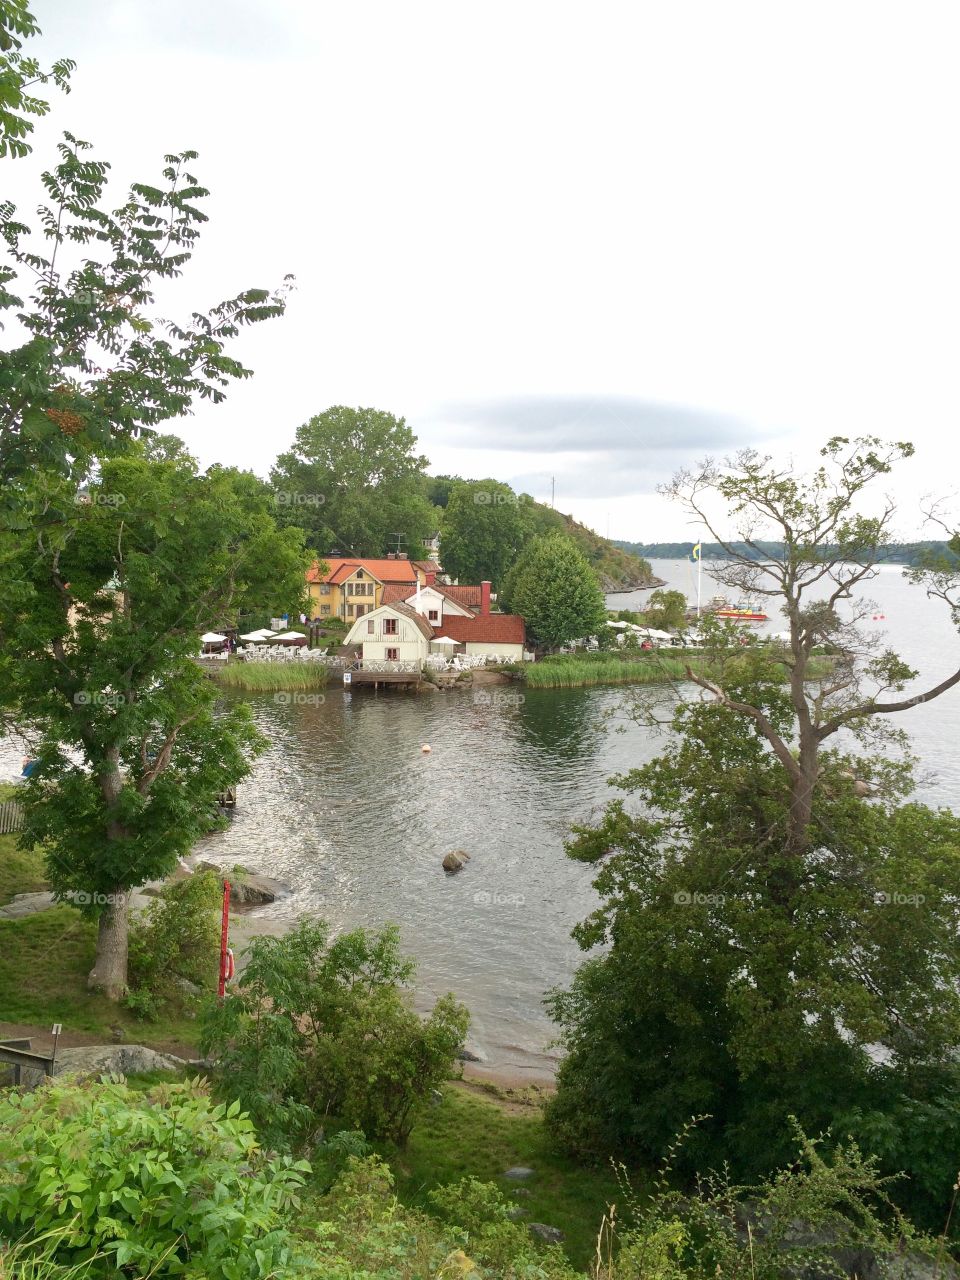 Bay in Waxholm , Sweden. My mother took us there 45 years ago. Memories forever! 